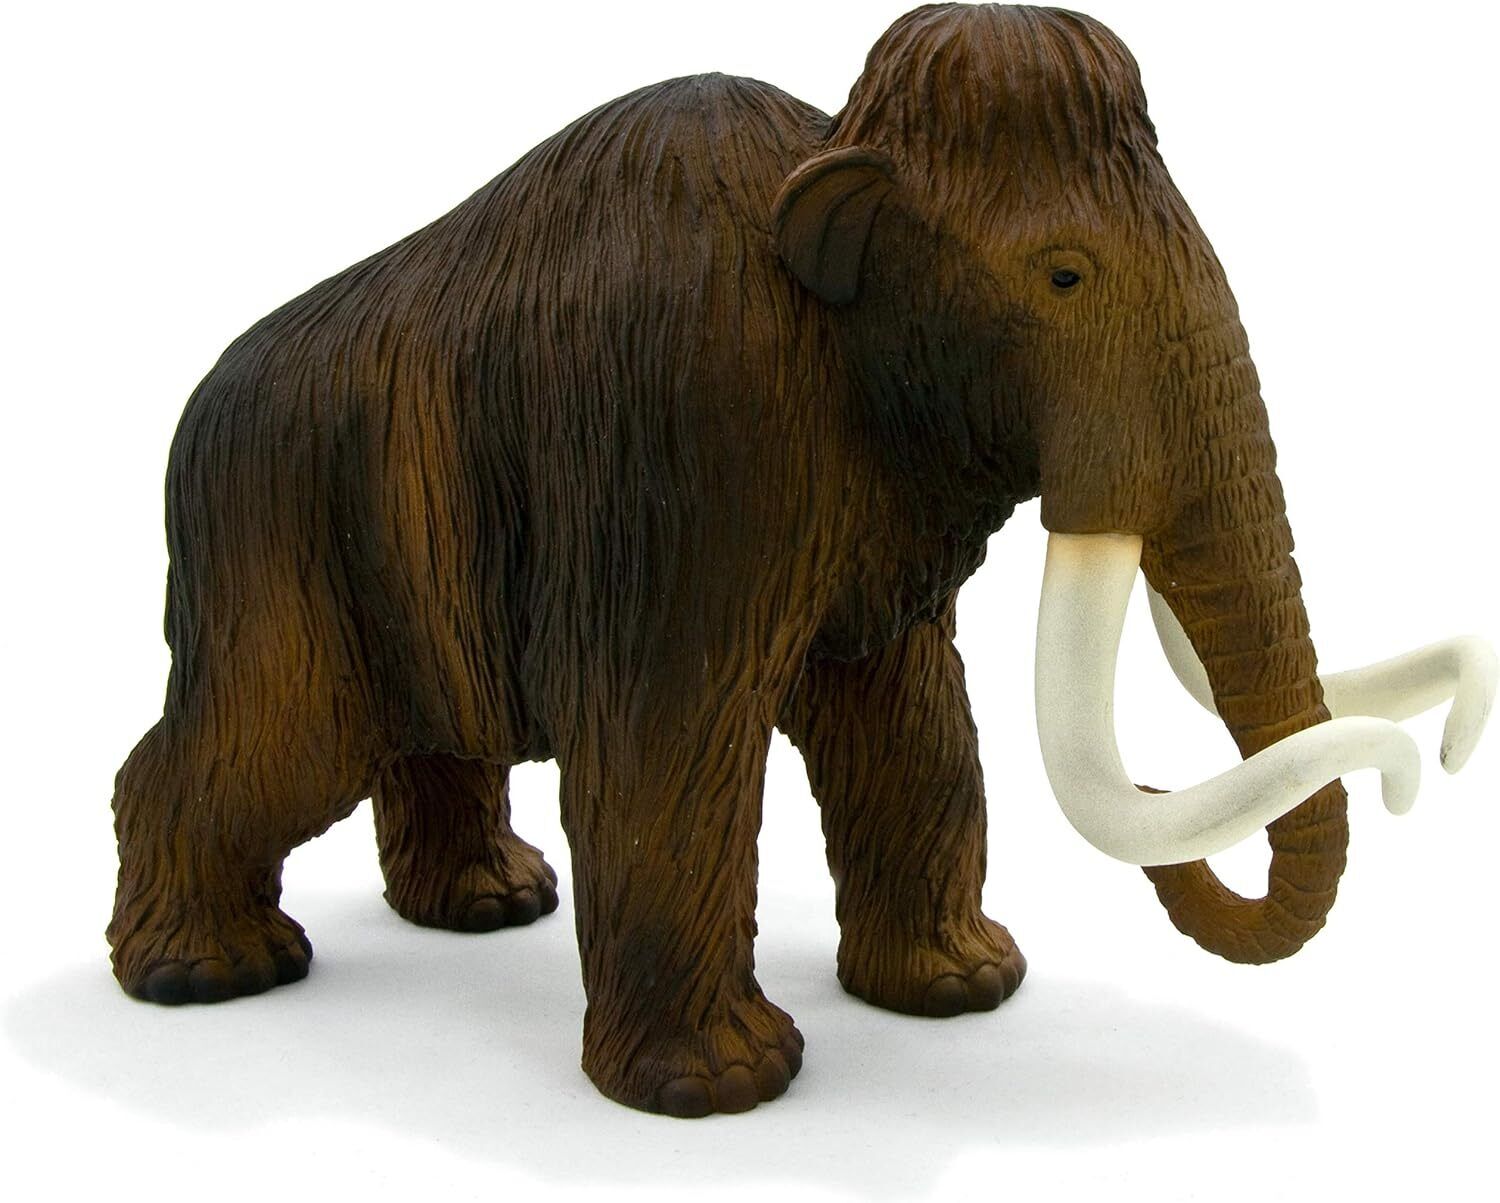 MOJO Woolly Mammoth (1:20 Scale) Realistic Prehistoric Toy Replica Hand Painted